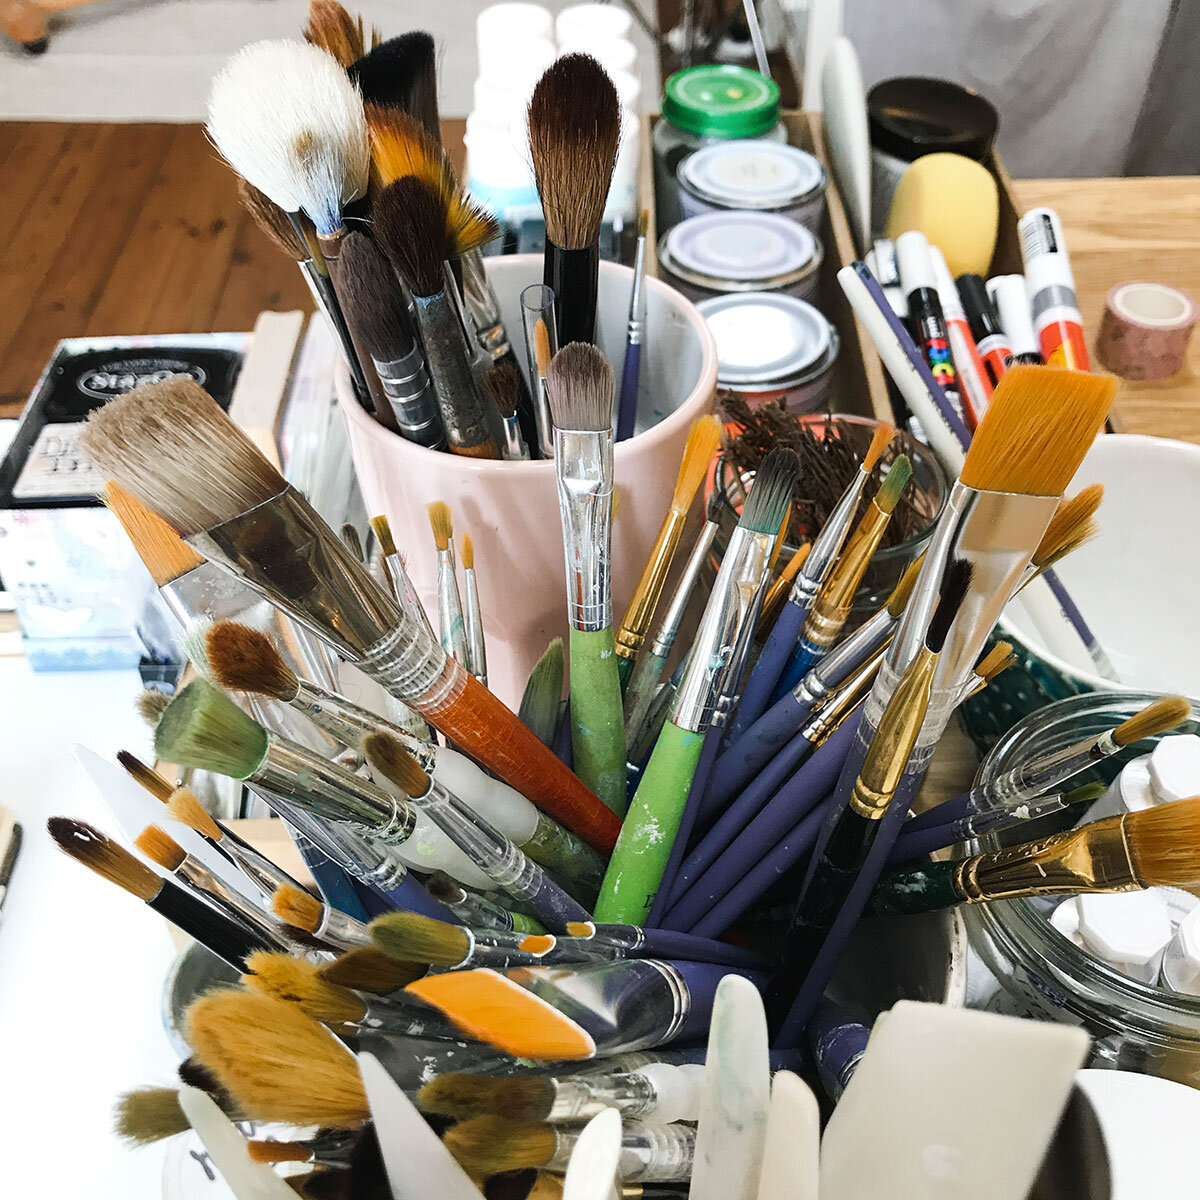 Large paintings require large brushes! My recommended art supplies are